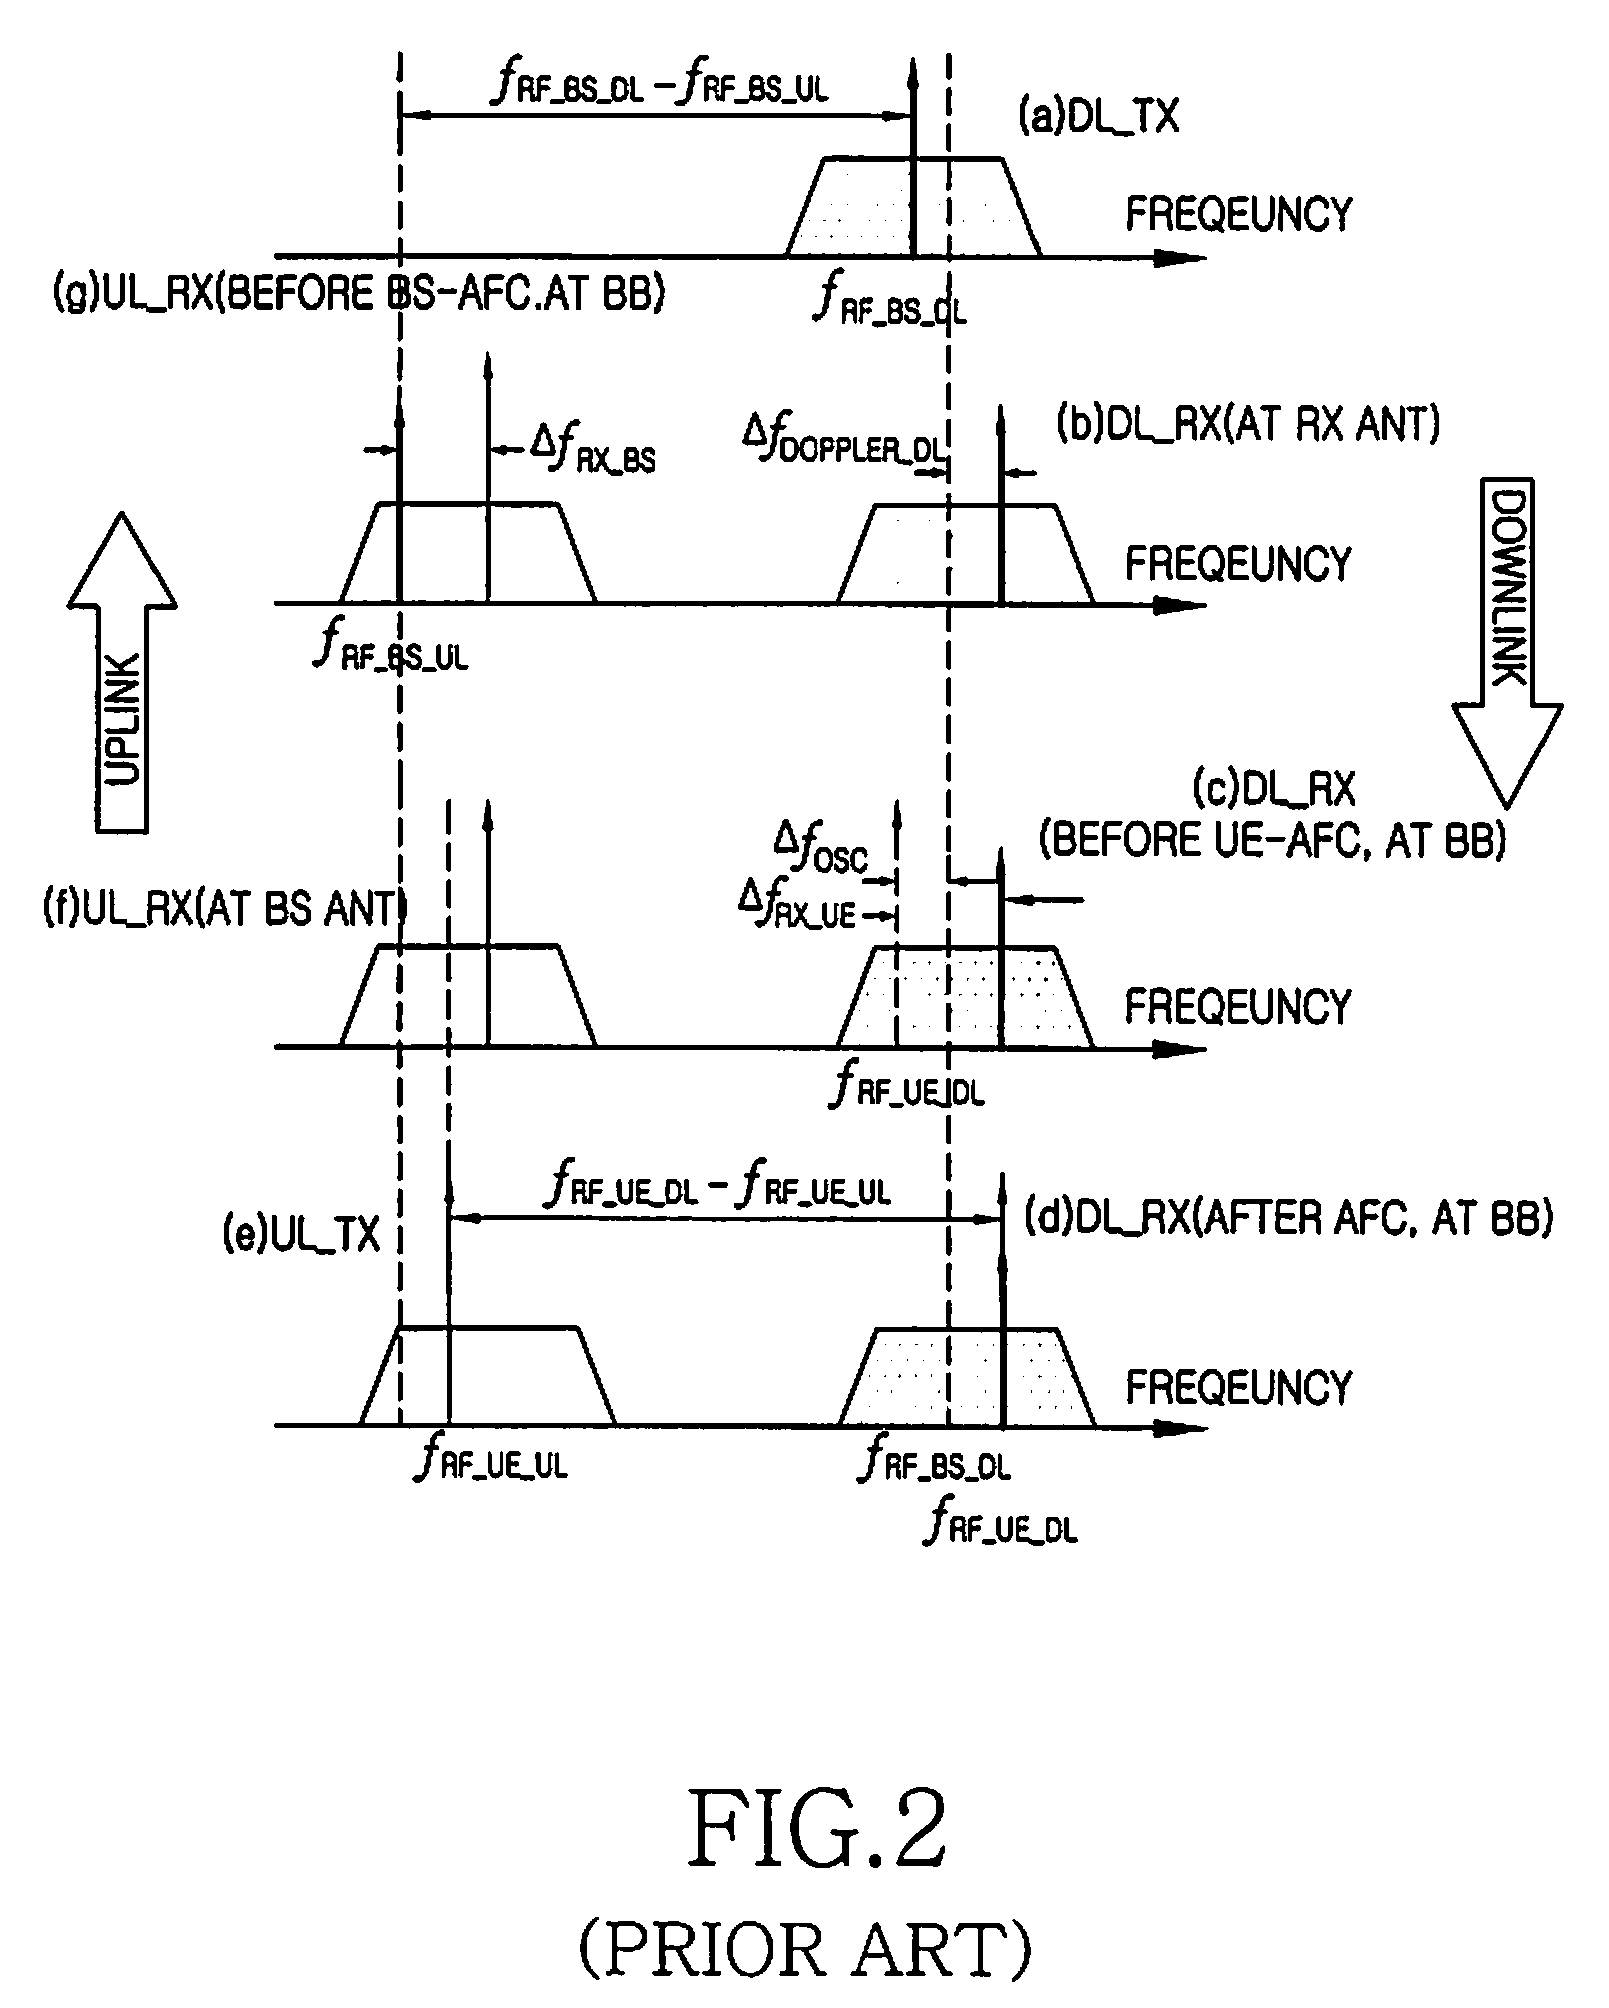 Apparatus and method for controlling frequency in mobile communication system